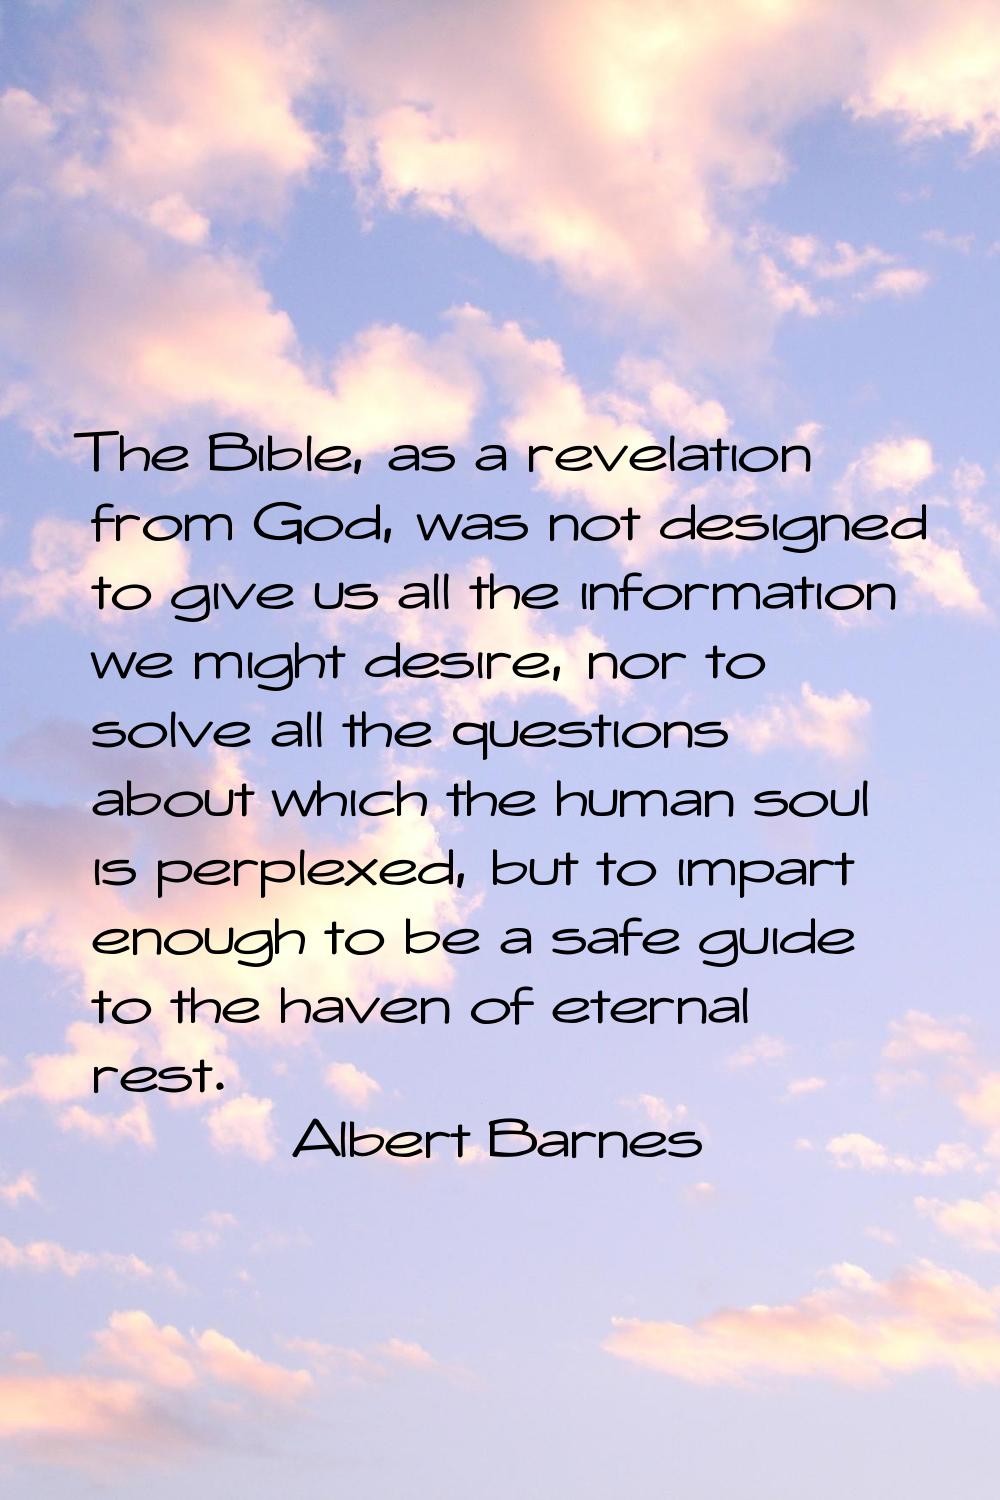 The Bible, as a revelation from God, was not designed to give us all the information we might desir